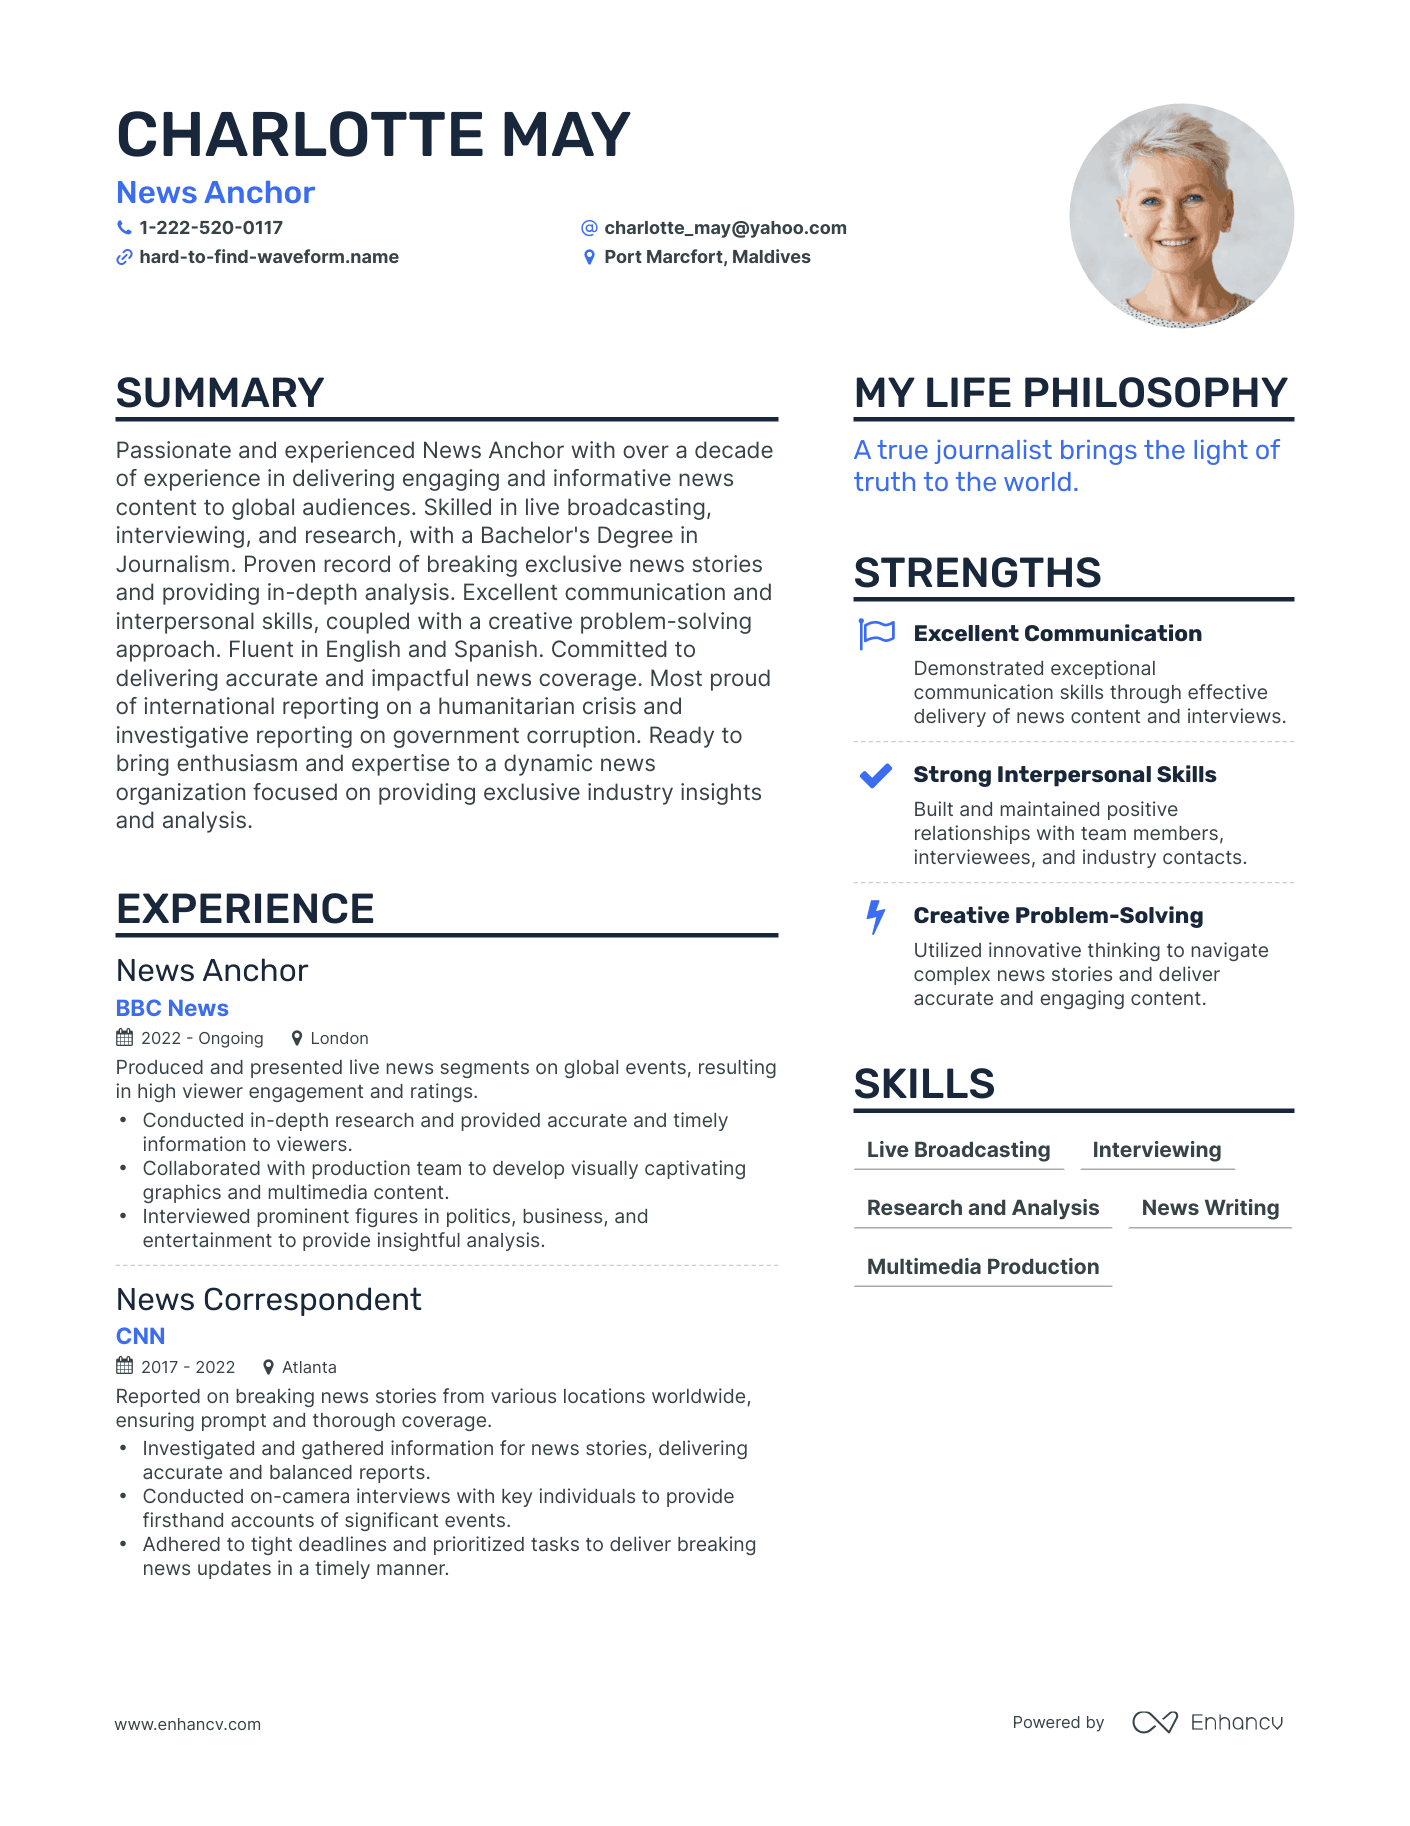 News Anchor resume example